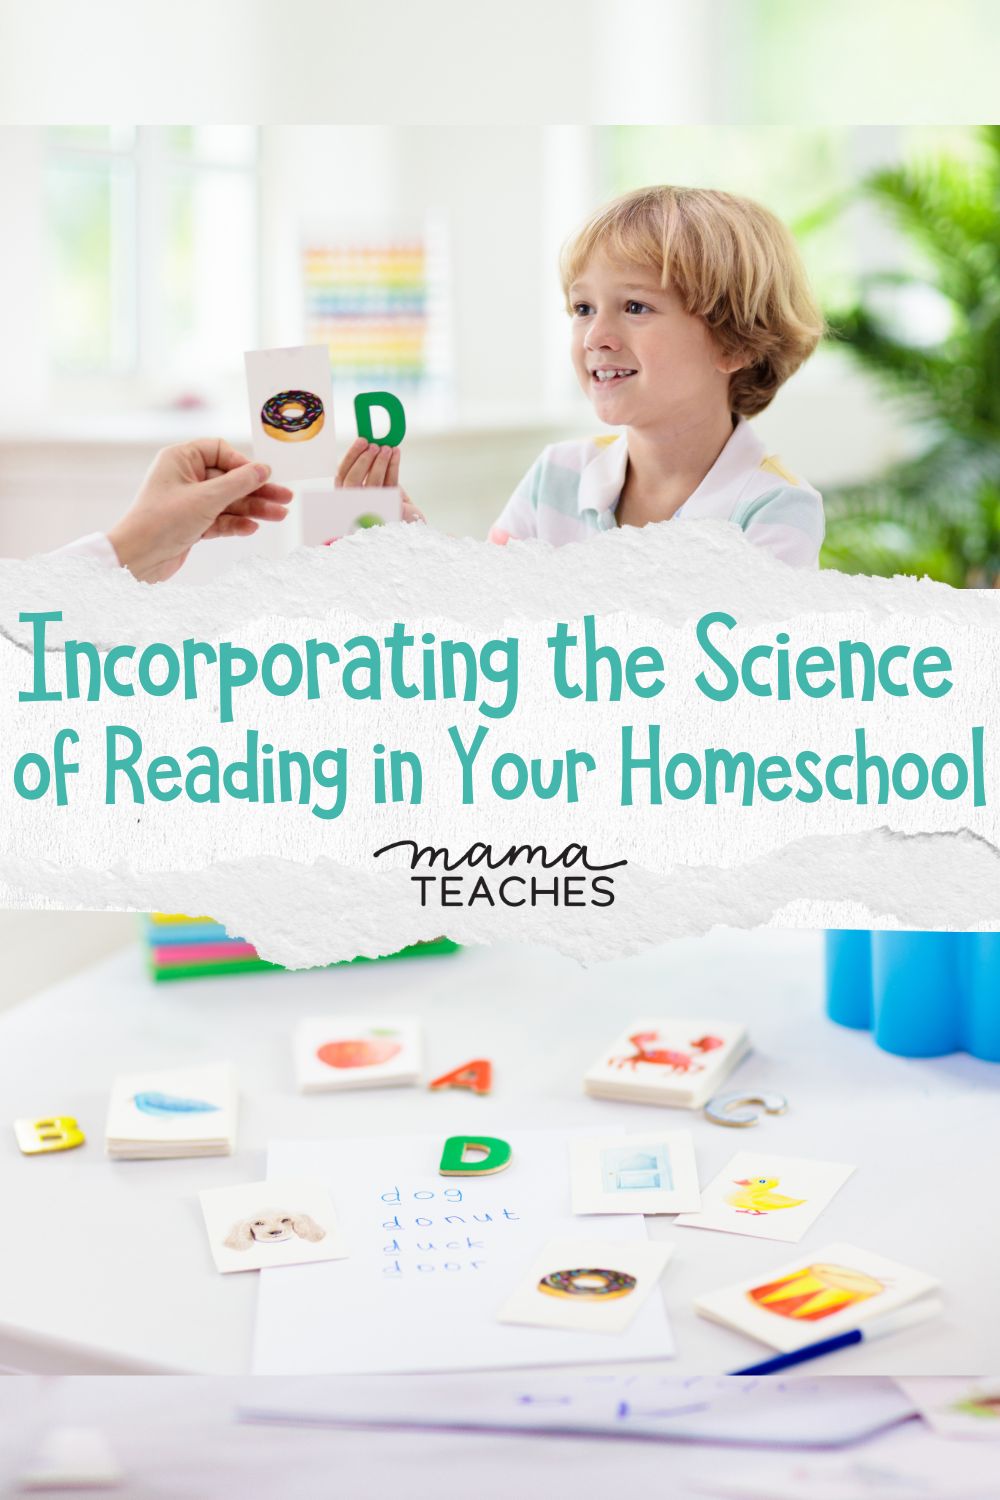 Incorporating the Science of Reading in Your Homeschool